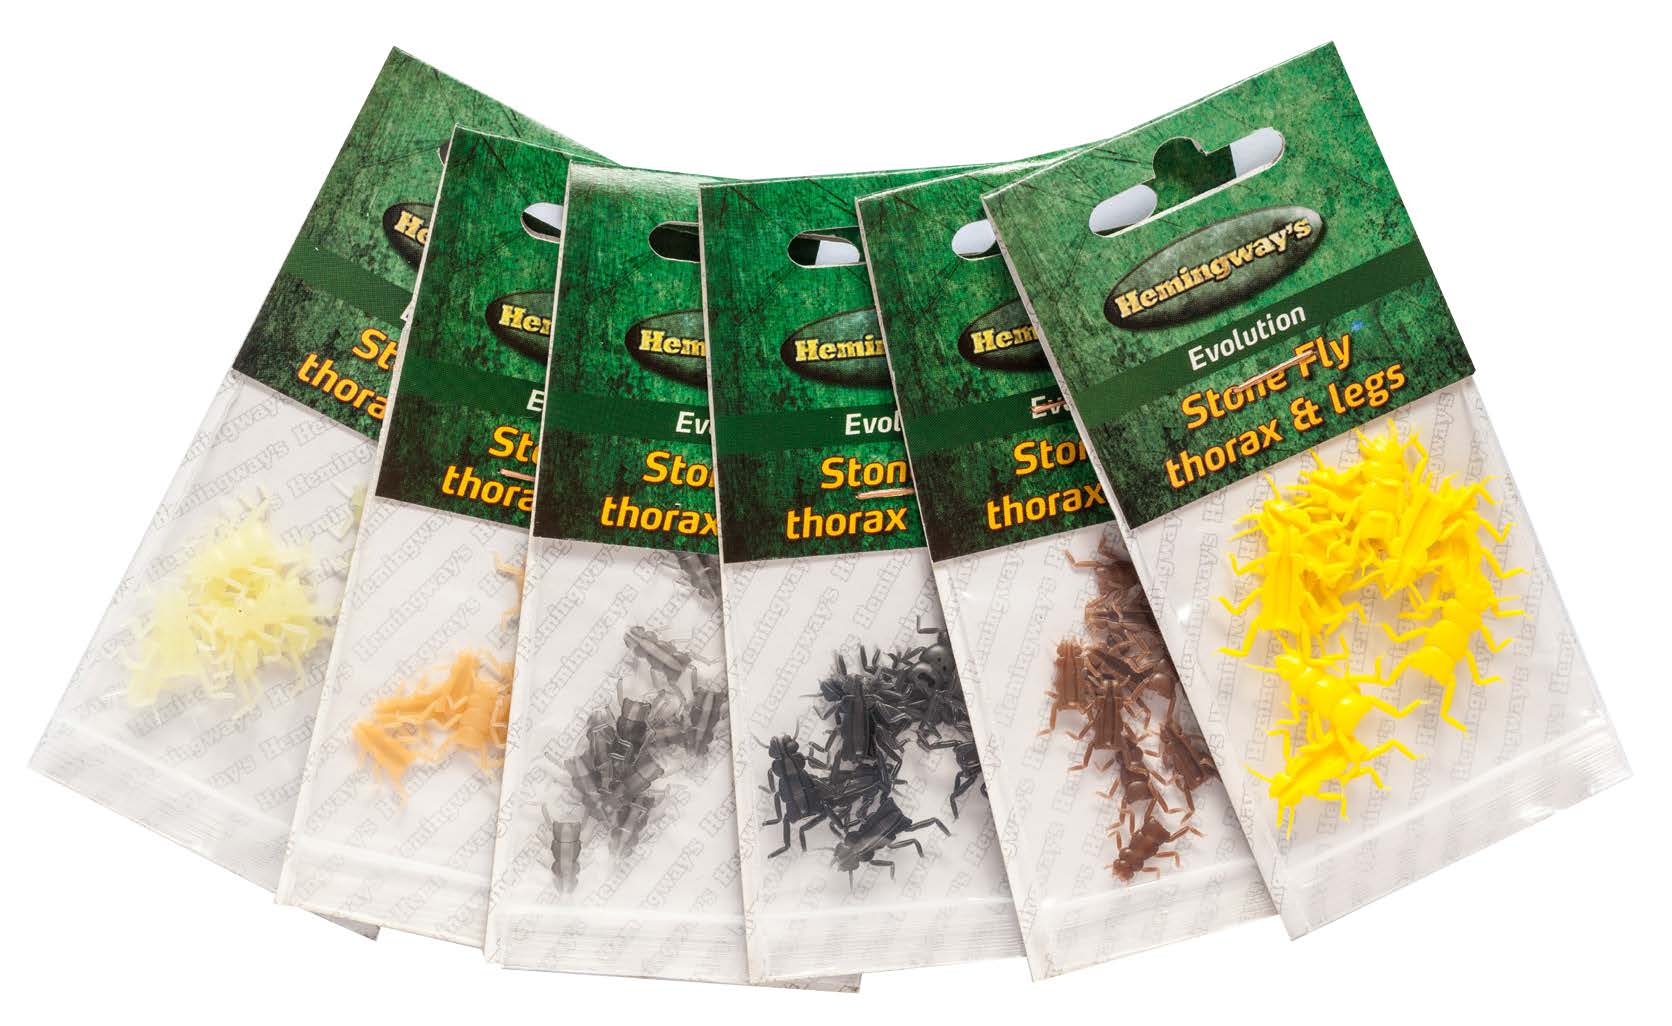 Hemingway's Evolution Stone Fly Thorax & Legs Small Clear Yellow Fly Tying Materials